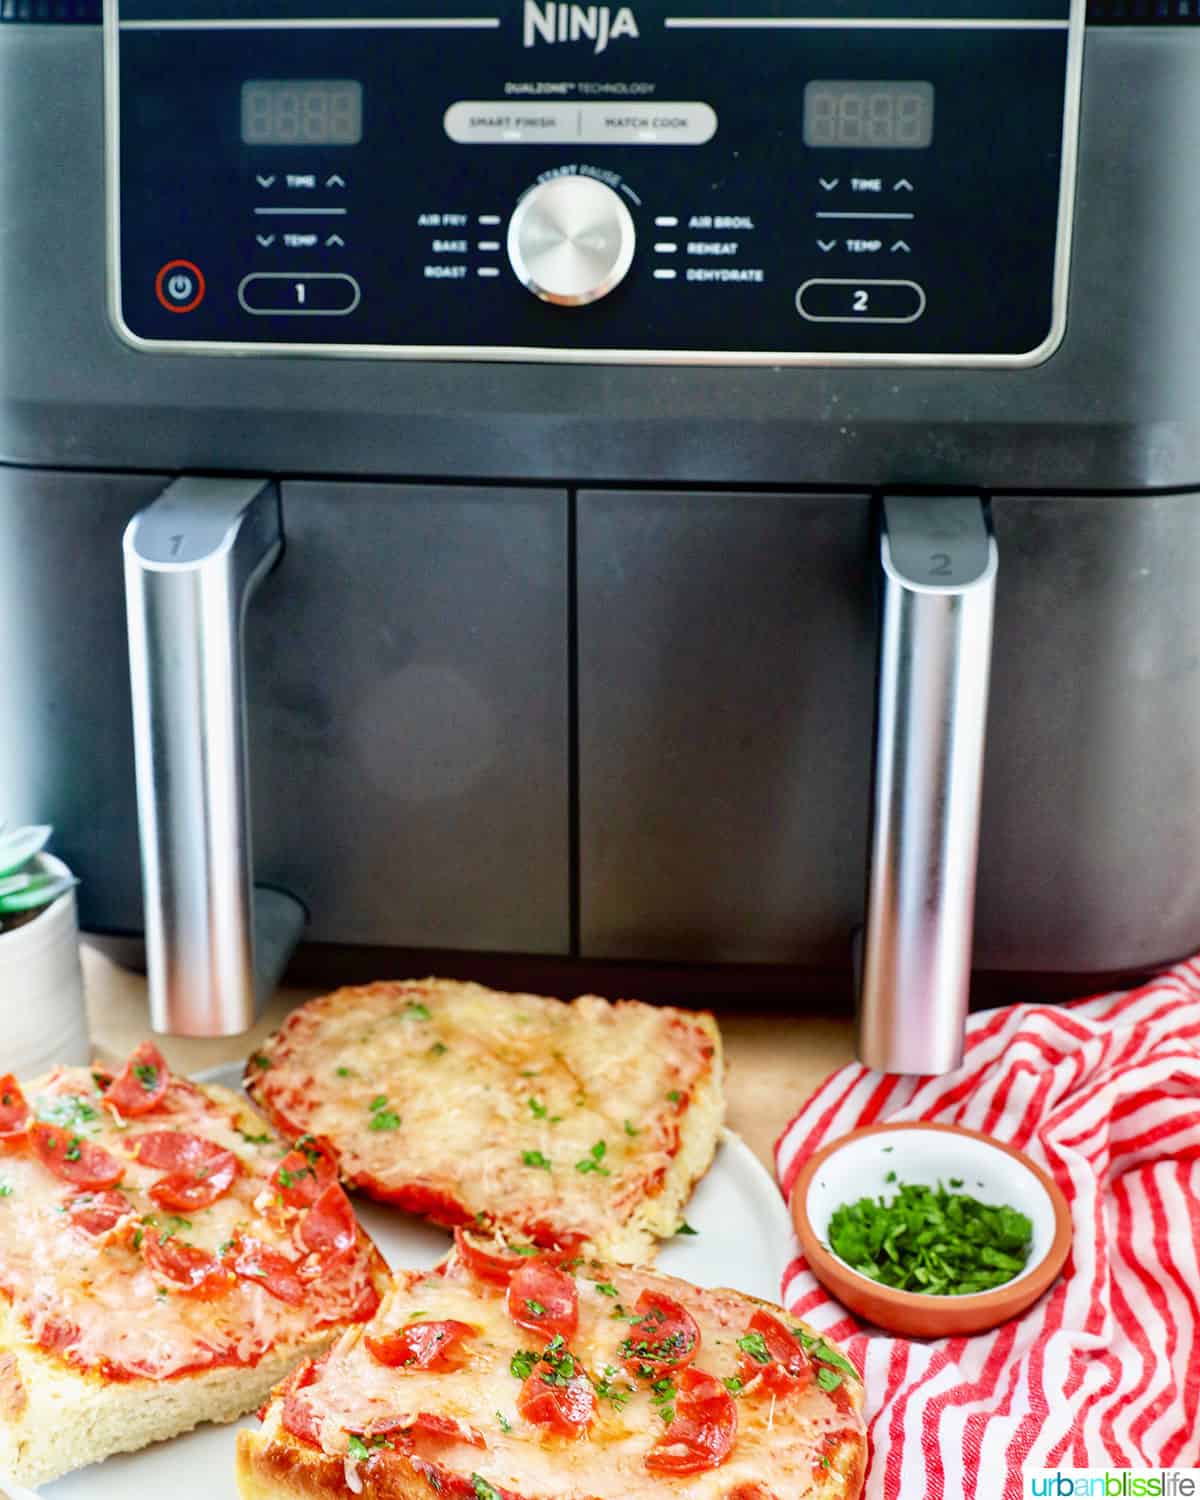 Ninja Foodi dual air fryer with french bread pizza and bowl of parsley in front on a red striped napkin.